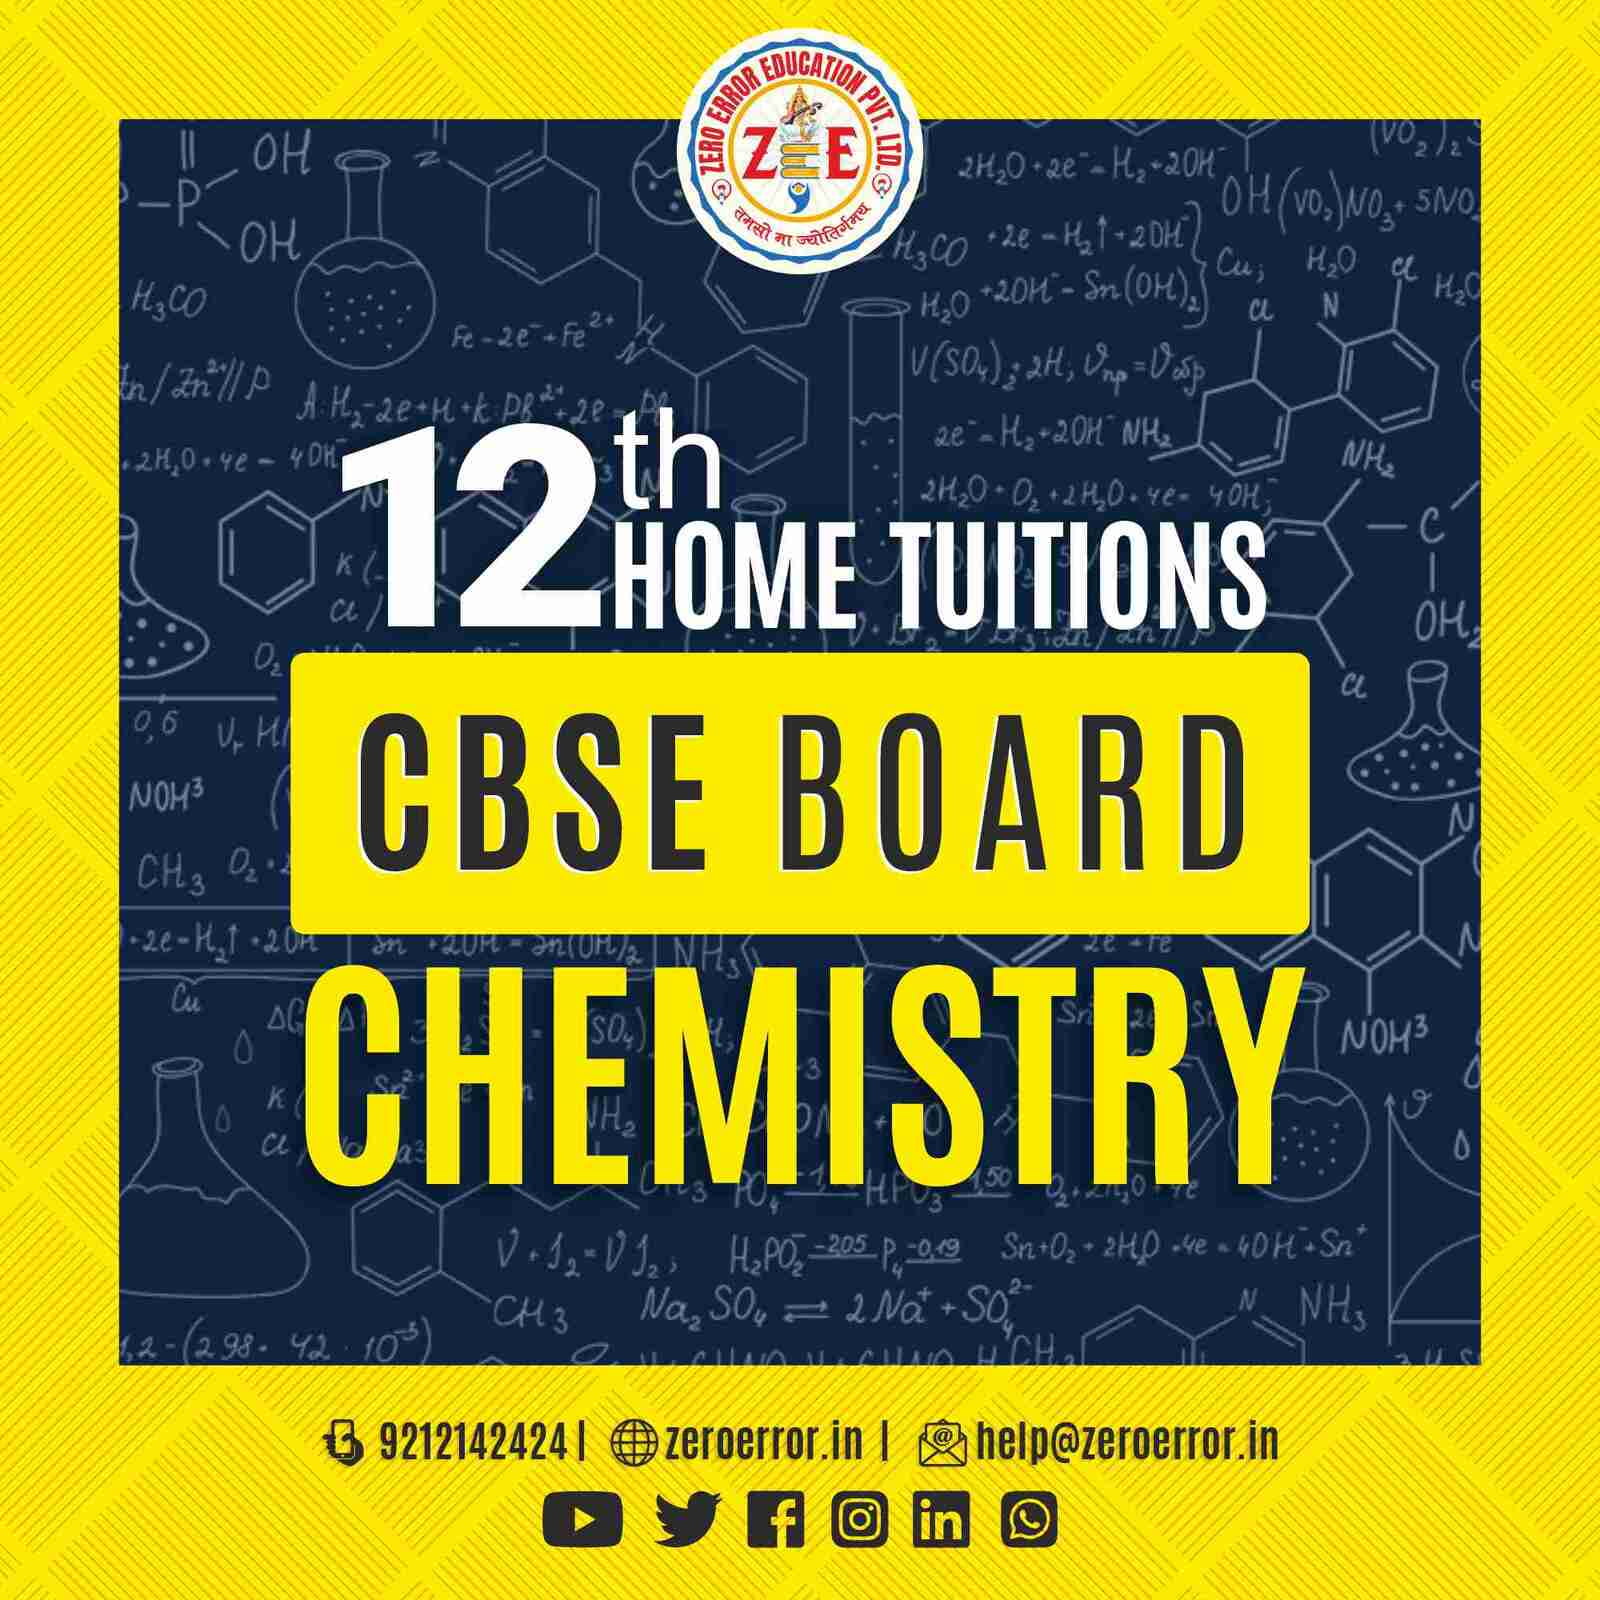 12th Grade CBSE Chemistry Online Classes by Zero Error Education Prepare for your CBSE board exams with online and offline Chemistry classes for 12th grade. Learn from experienced home tutors and get all the help you need to succeed. Enroll today at Zero Error Education. [https://zeroerror.in/] Call 9212142424 for more information.